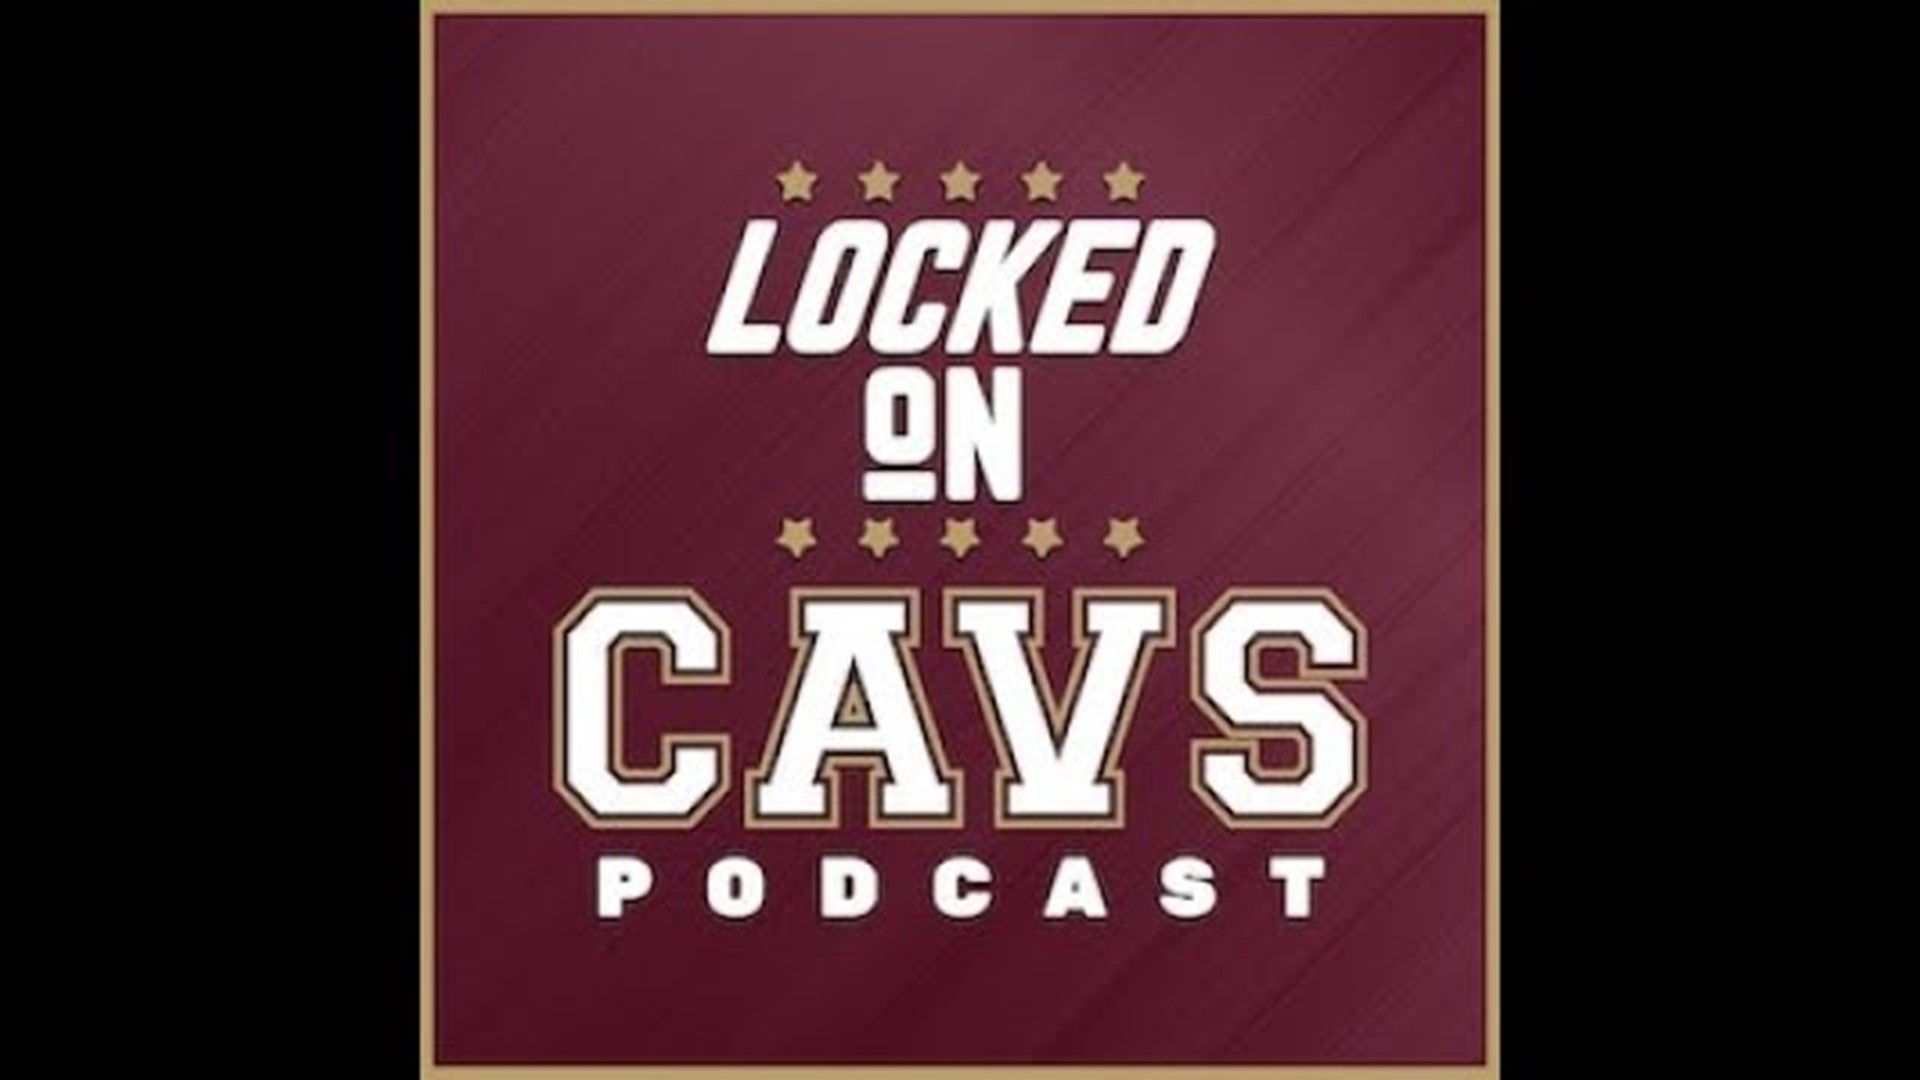 Chris and Evan discuss players that could fit the Cavs in the future.